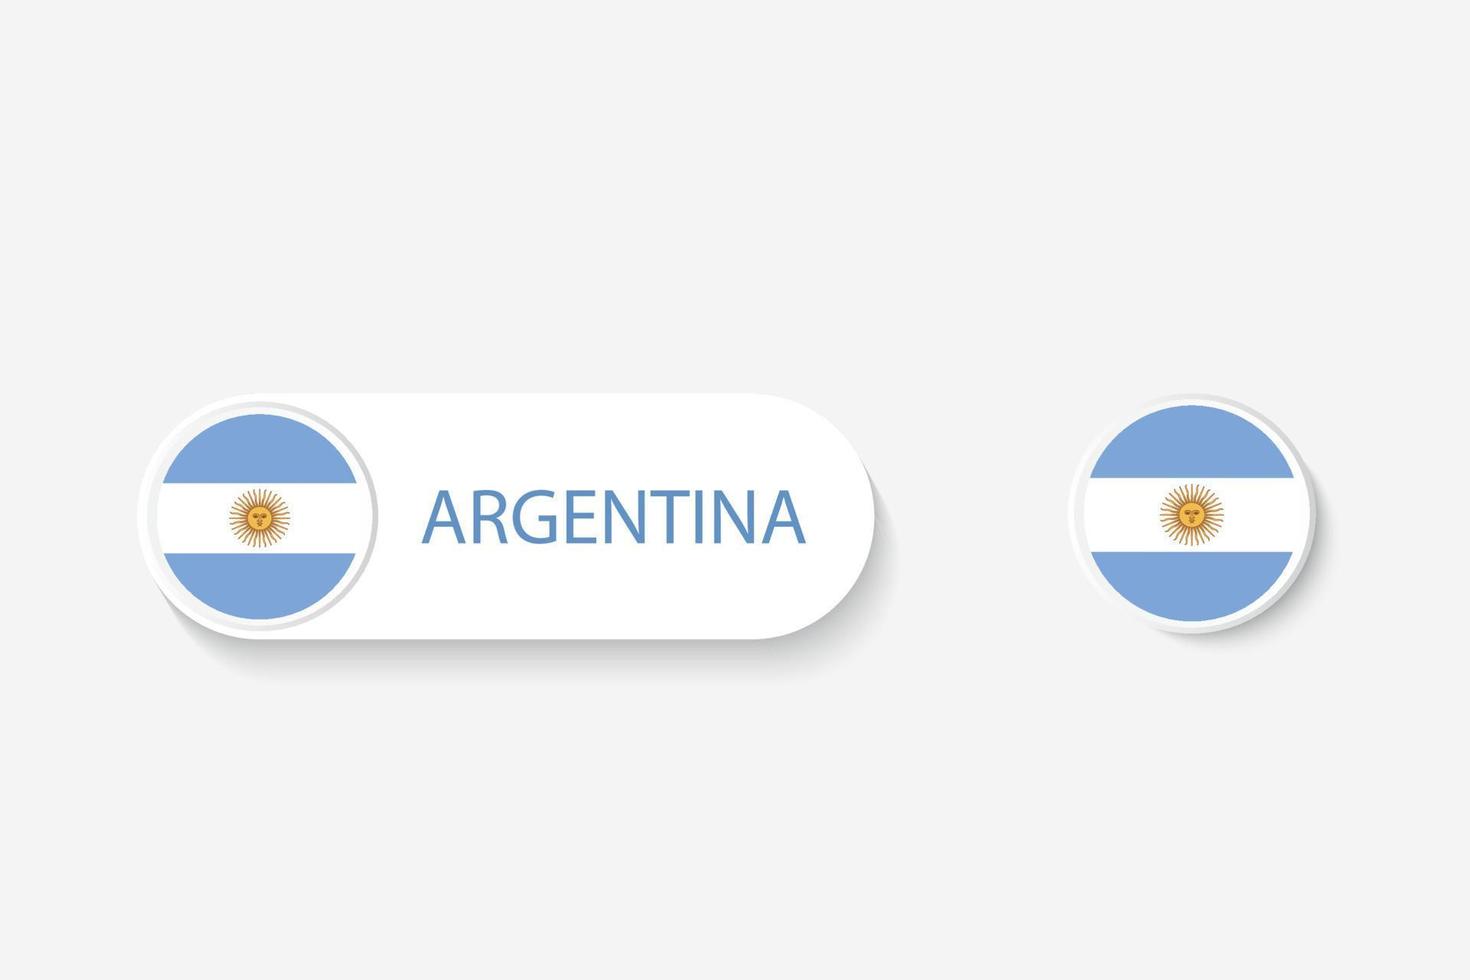 Argentina button flag in illustration of oval shaped with word of Argentina. And button flag Argentina. vector